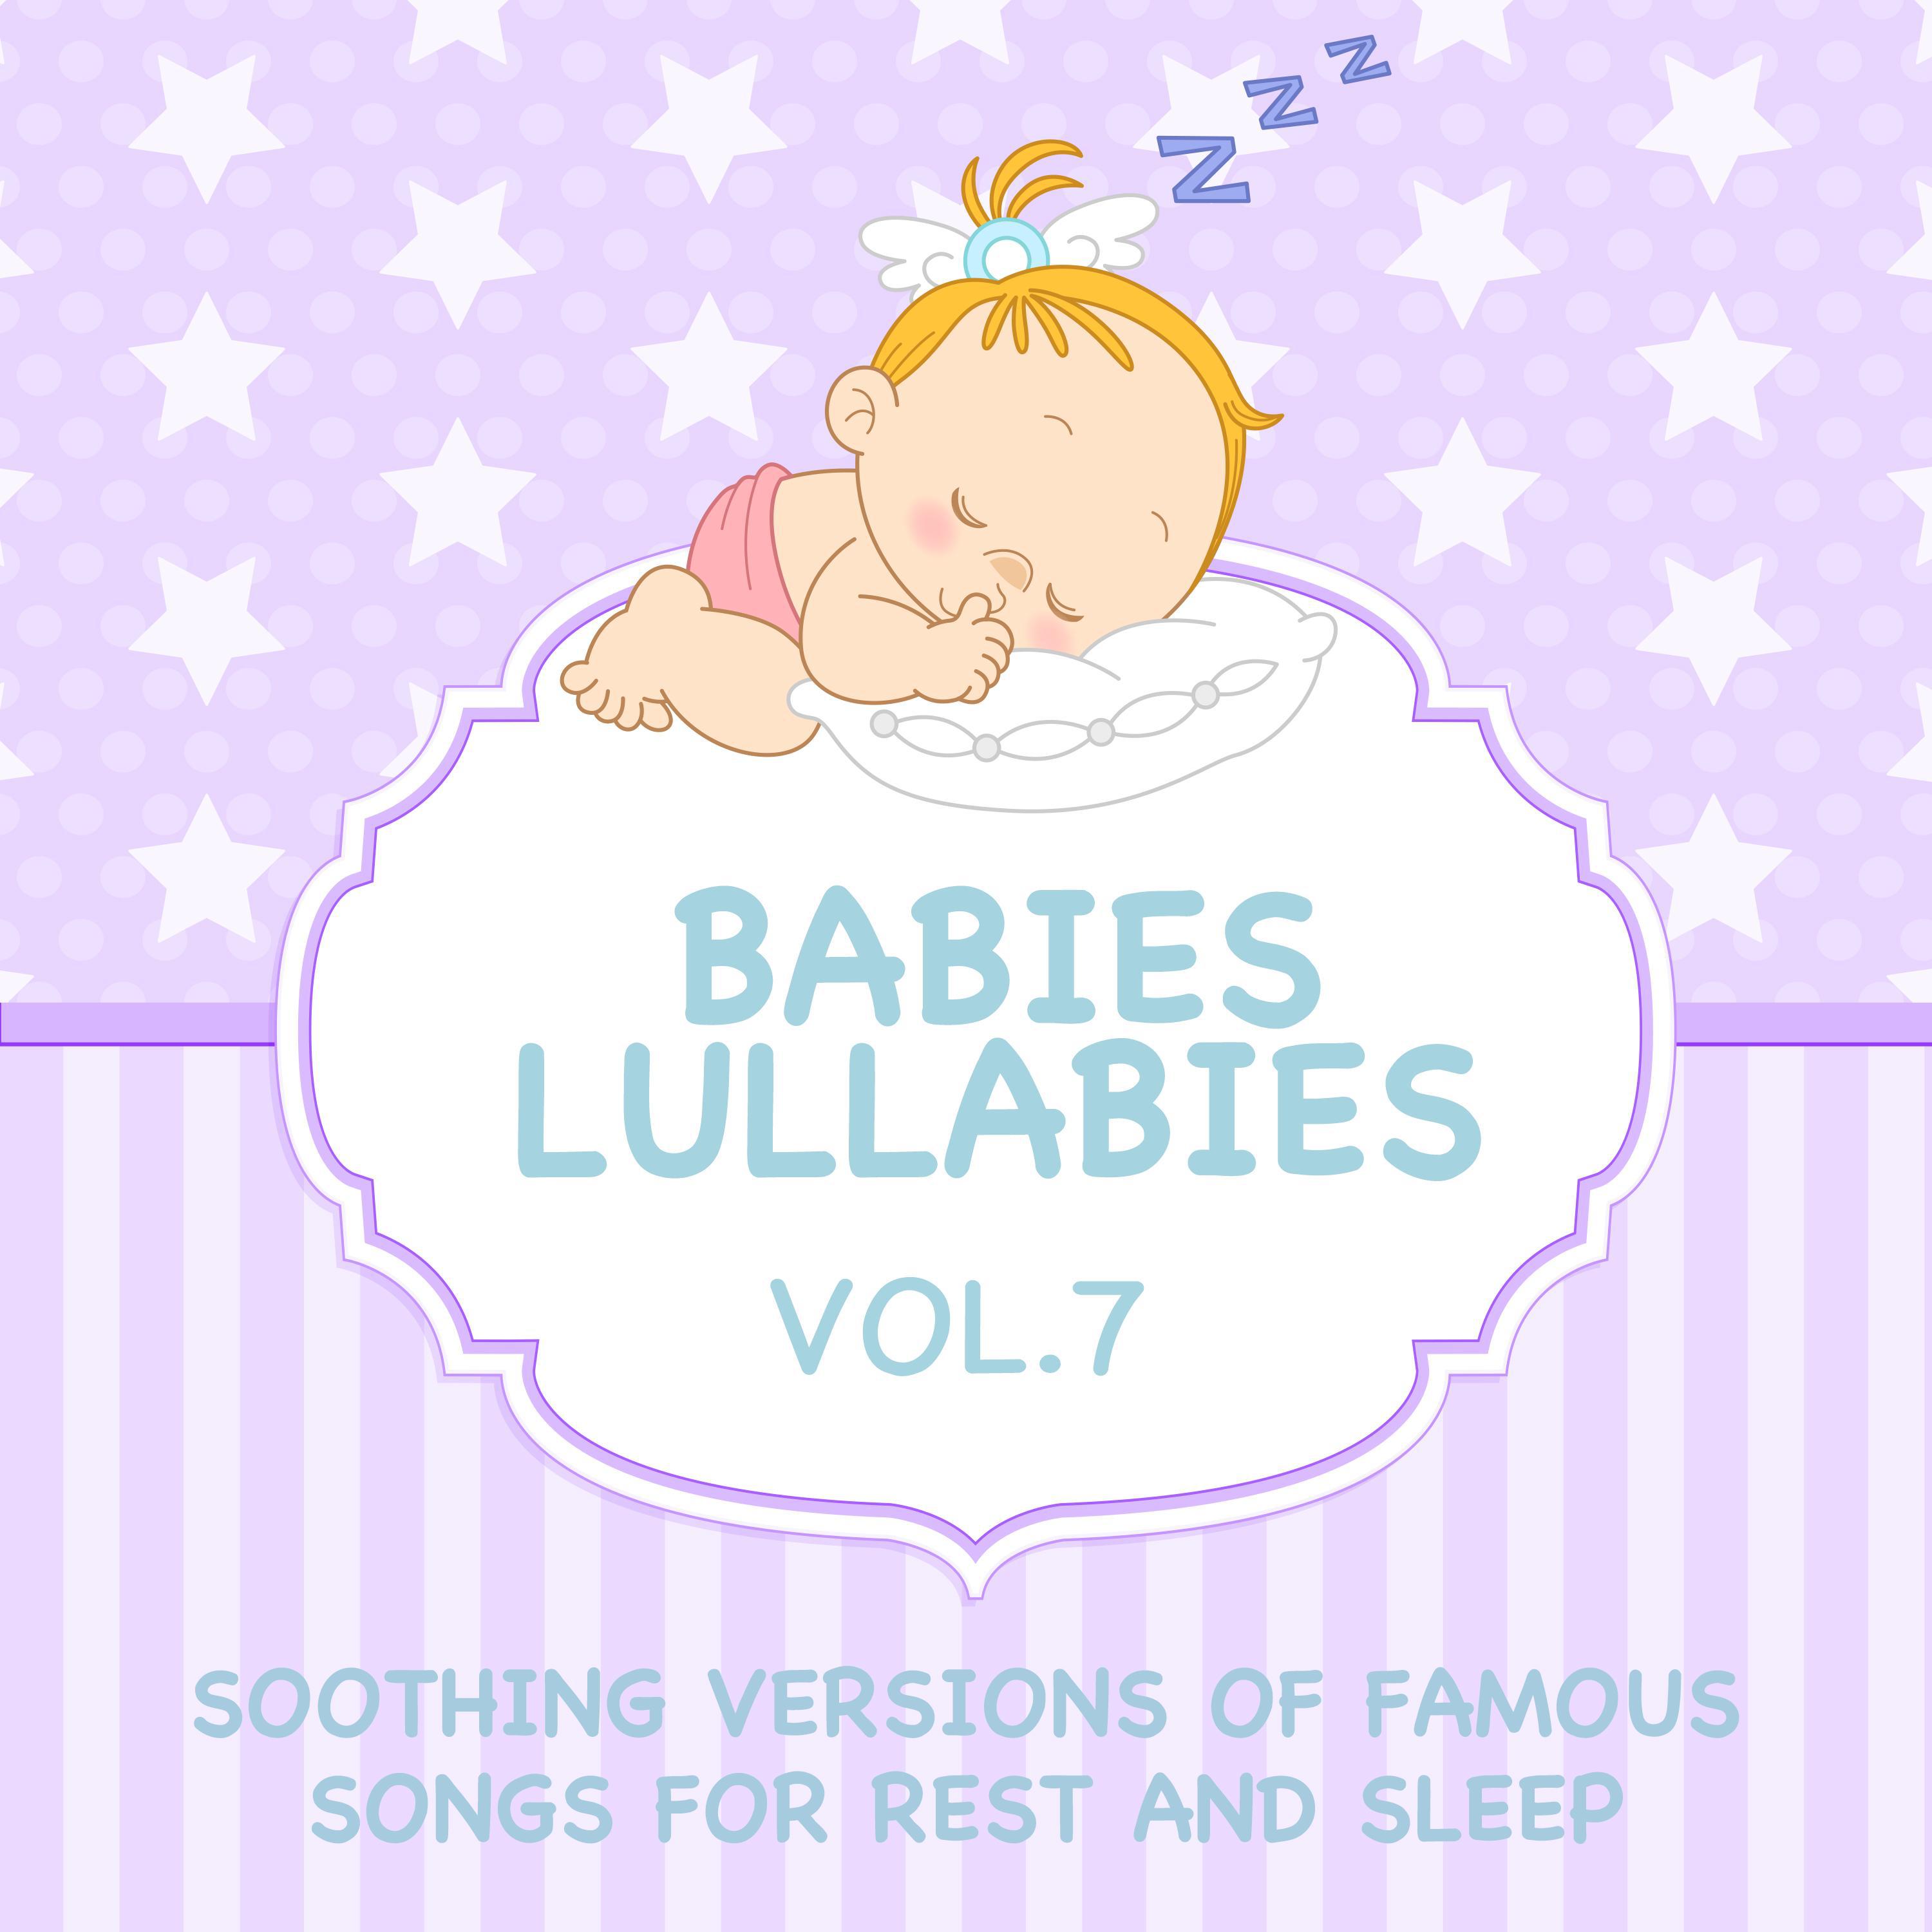 Babies Lullabies - Soothing Versions of Famous Songs for Rest and Sleep, Vol. 7